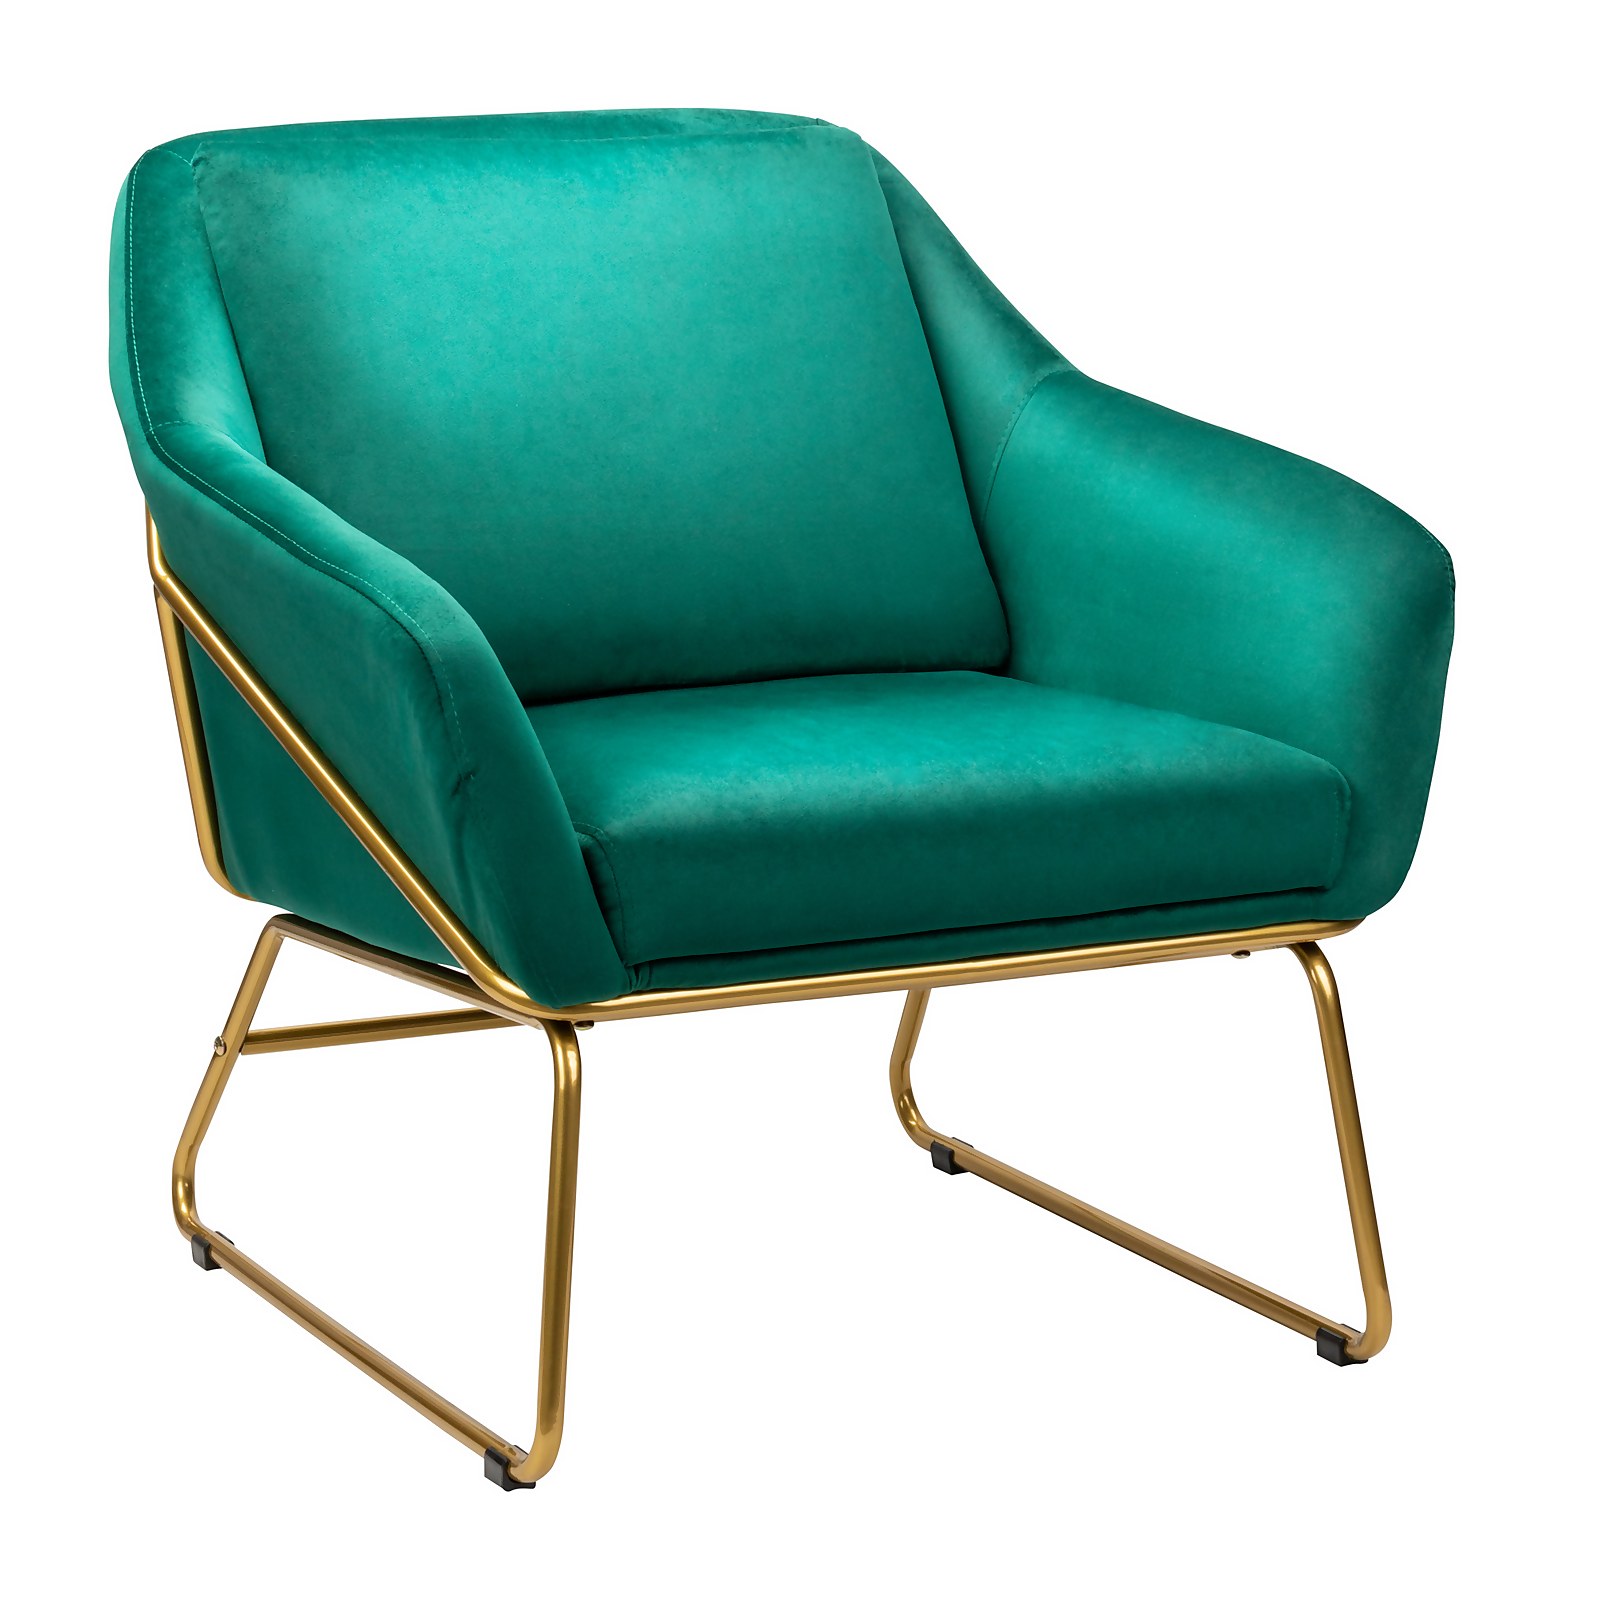 Photo of Evelyn Metal Frame Chair - Emerald